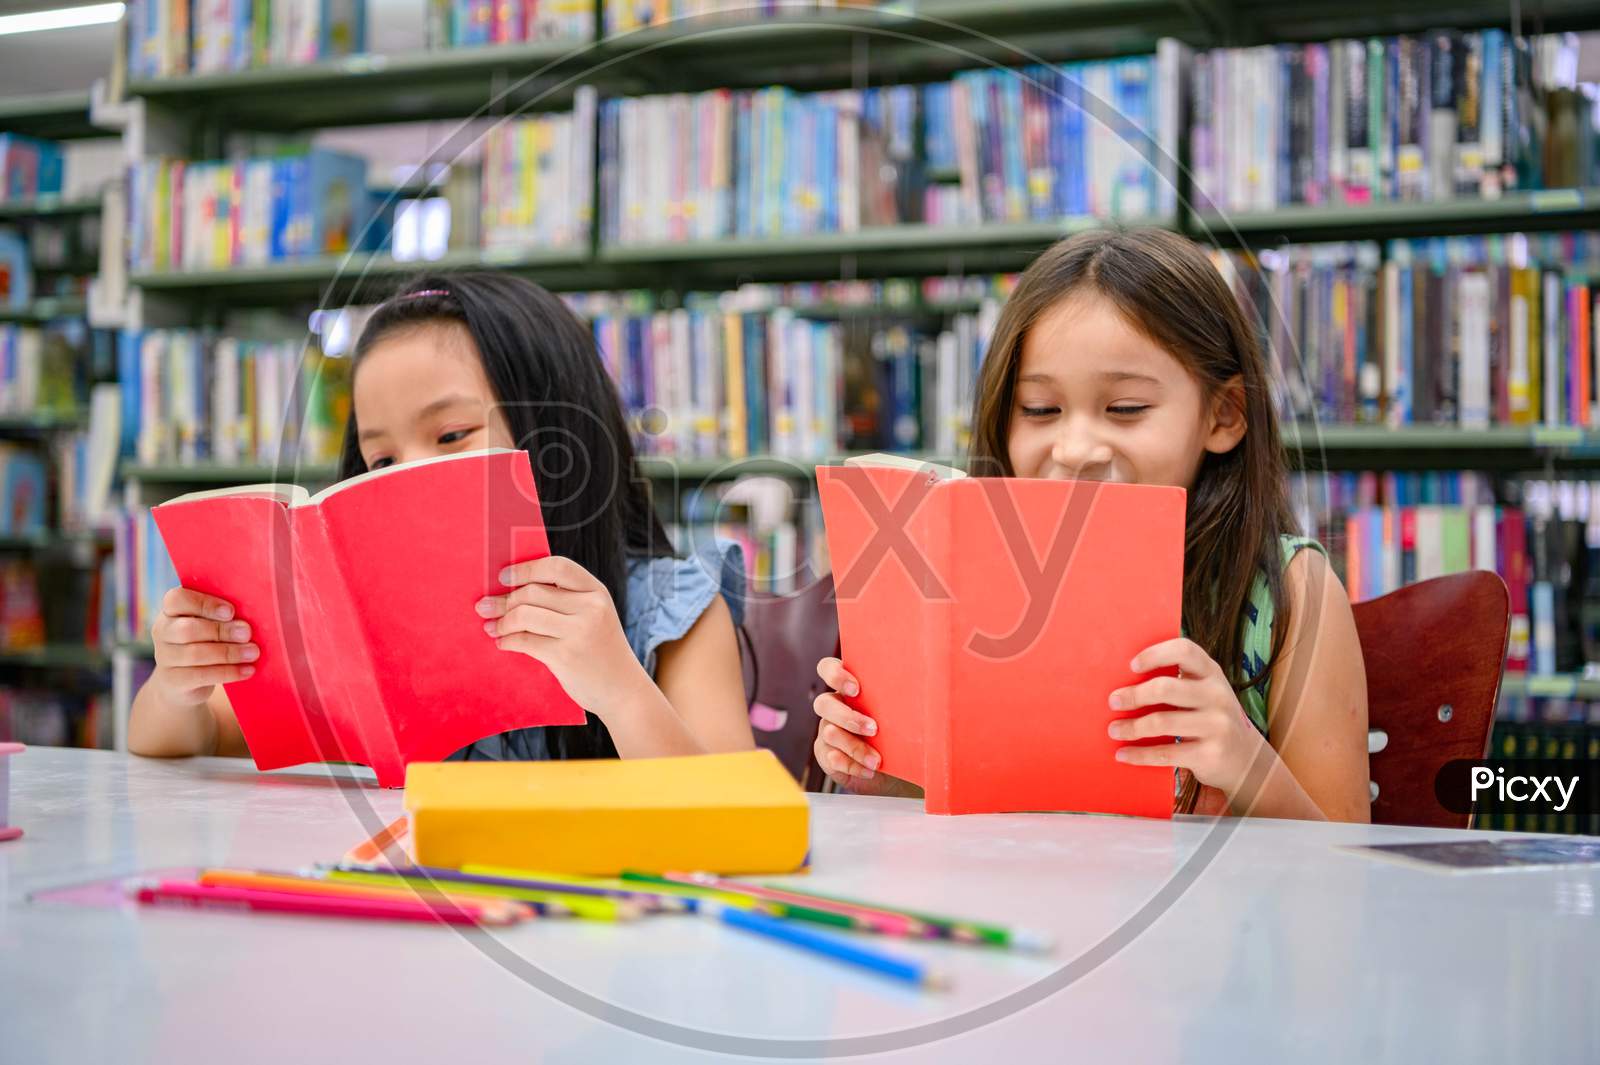 Happiness Two Cute Diversity Girls Reading Book In School Library Funny. People Lifestyles And Friend Education And Friendship Concept. Leisure Child And Kids Group Activity